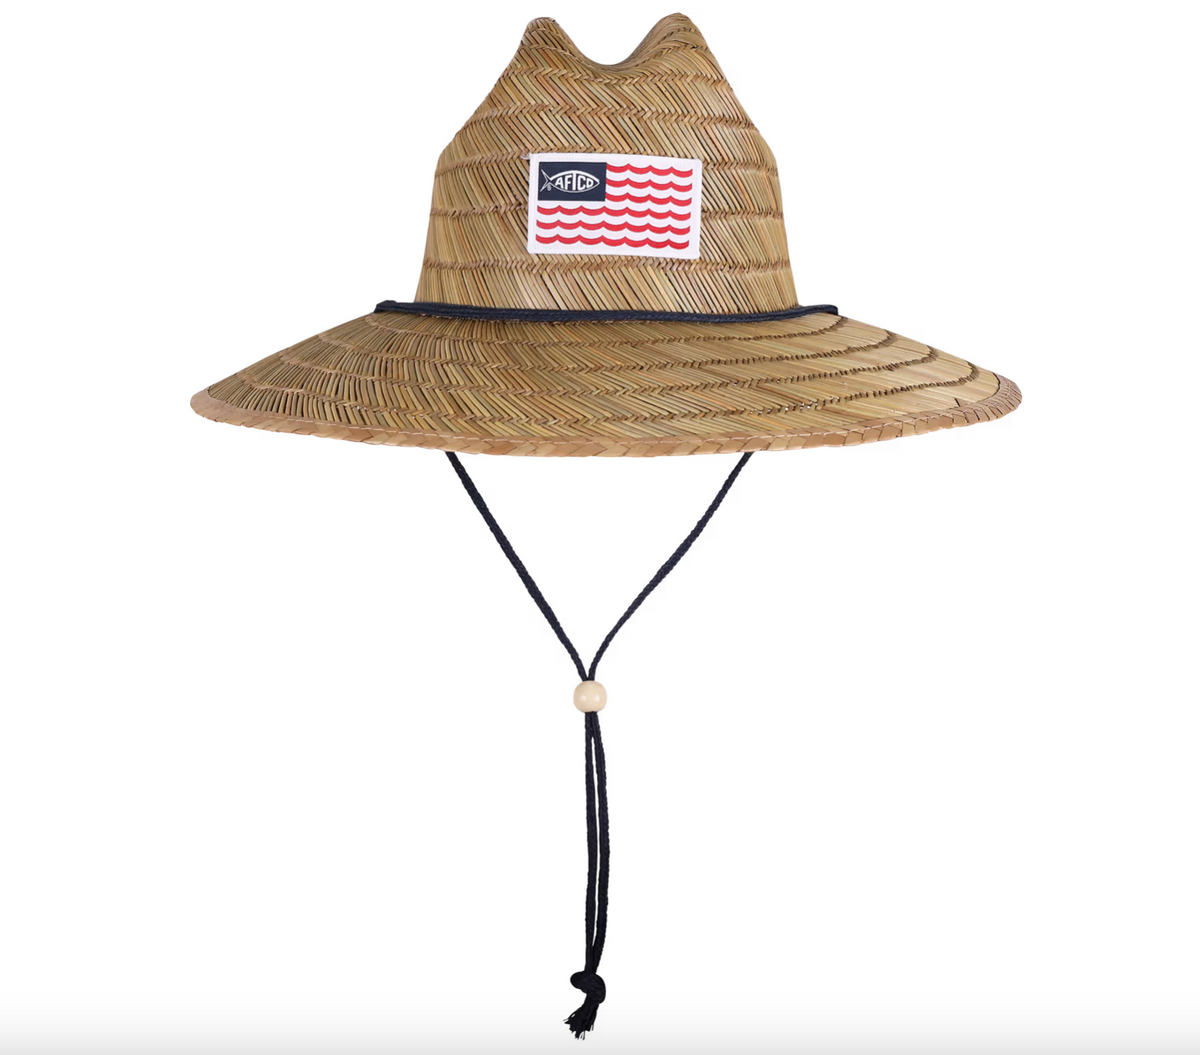 Aftco Palapa 3 Straw Hat